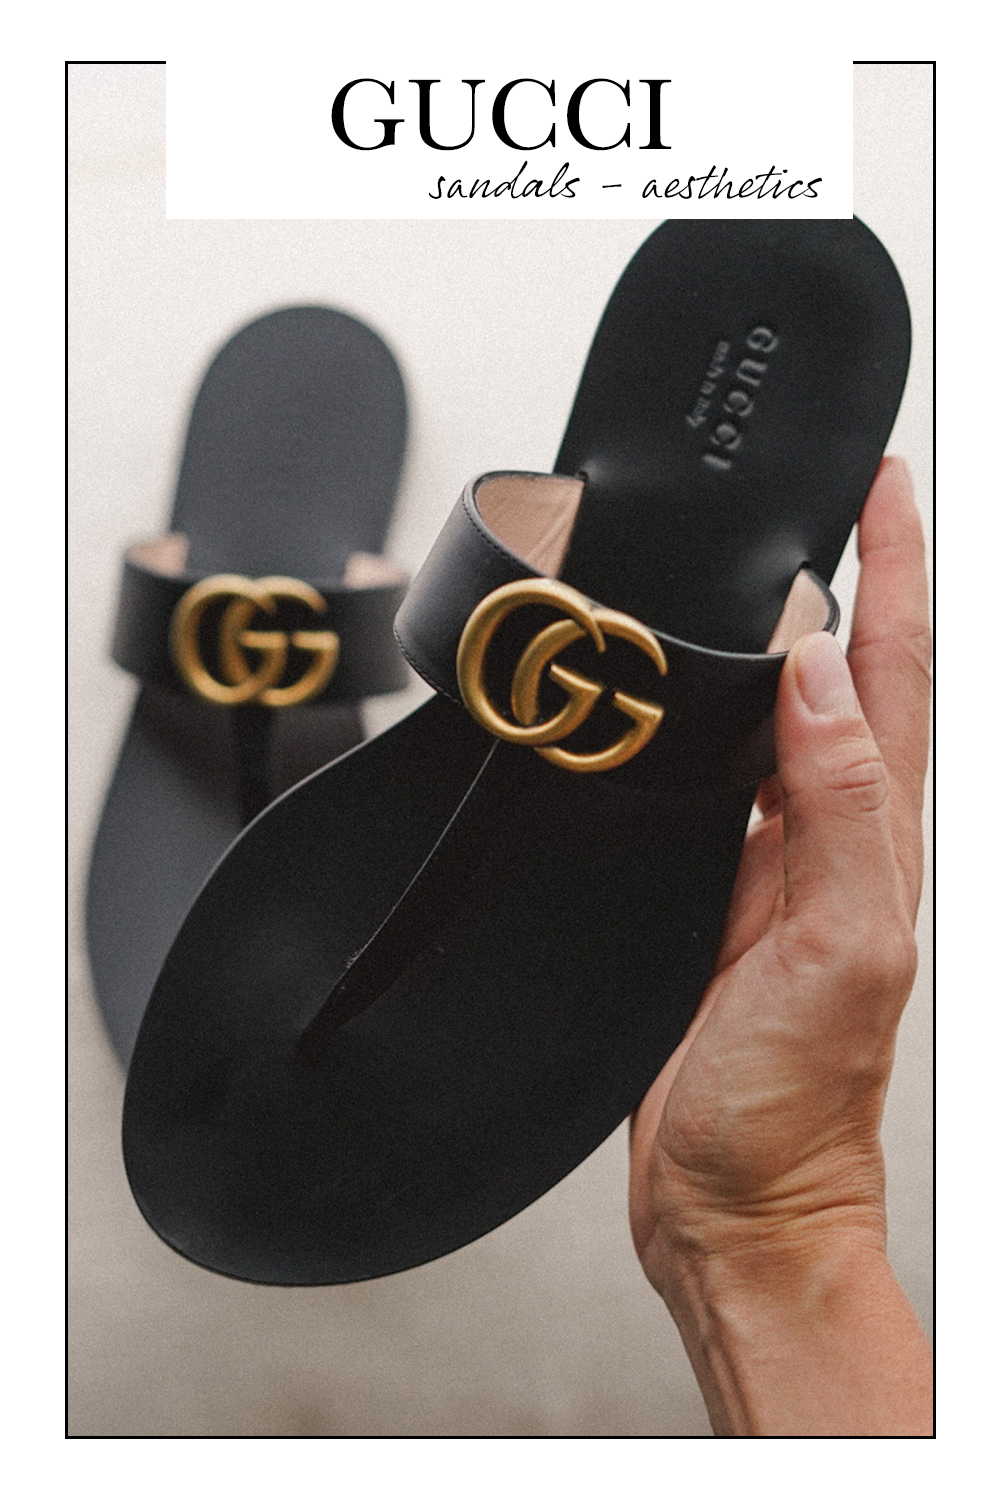 Gucci Sandal Review | Sustainability, Fit, Price and More! | Jessica Ashley